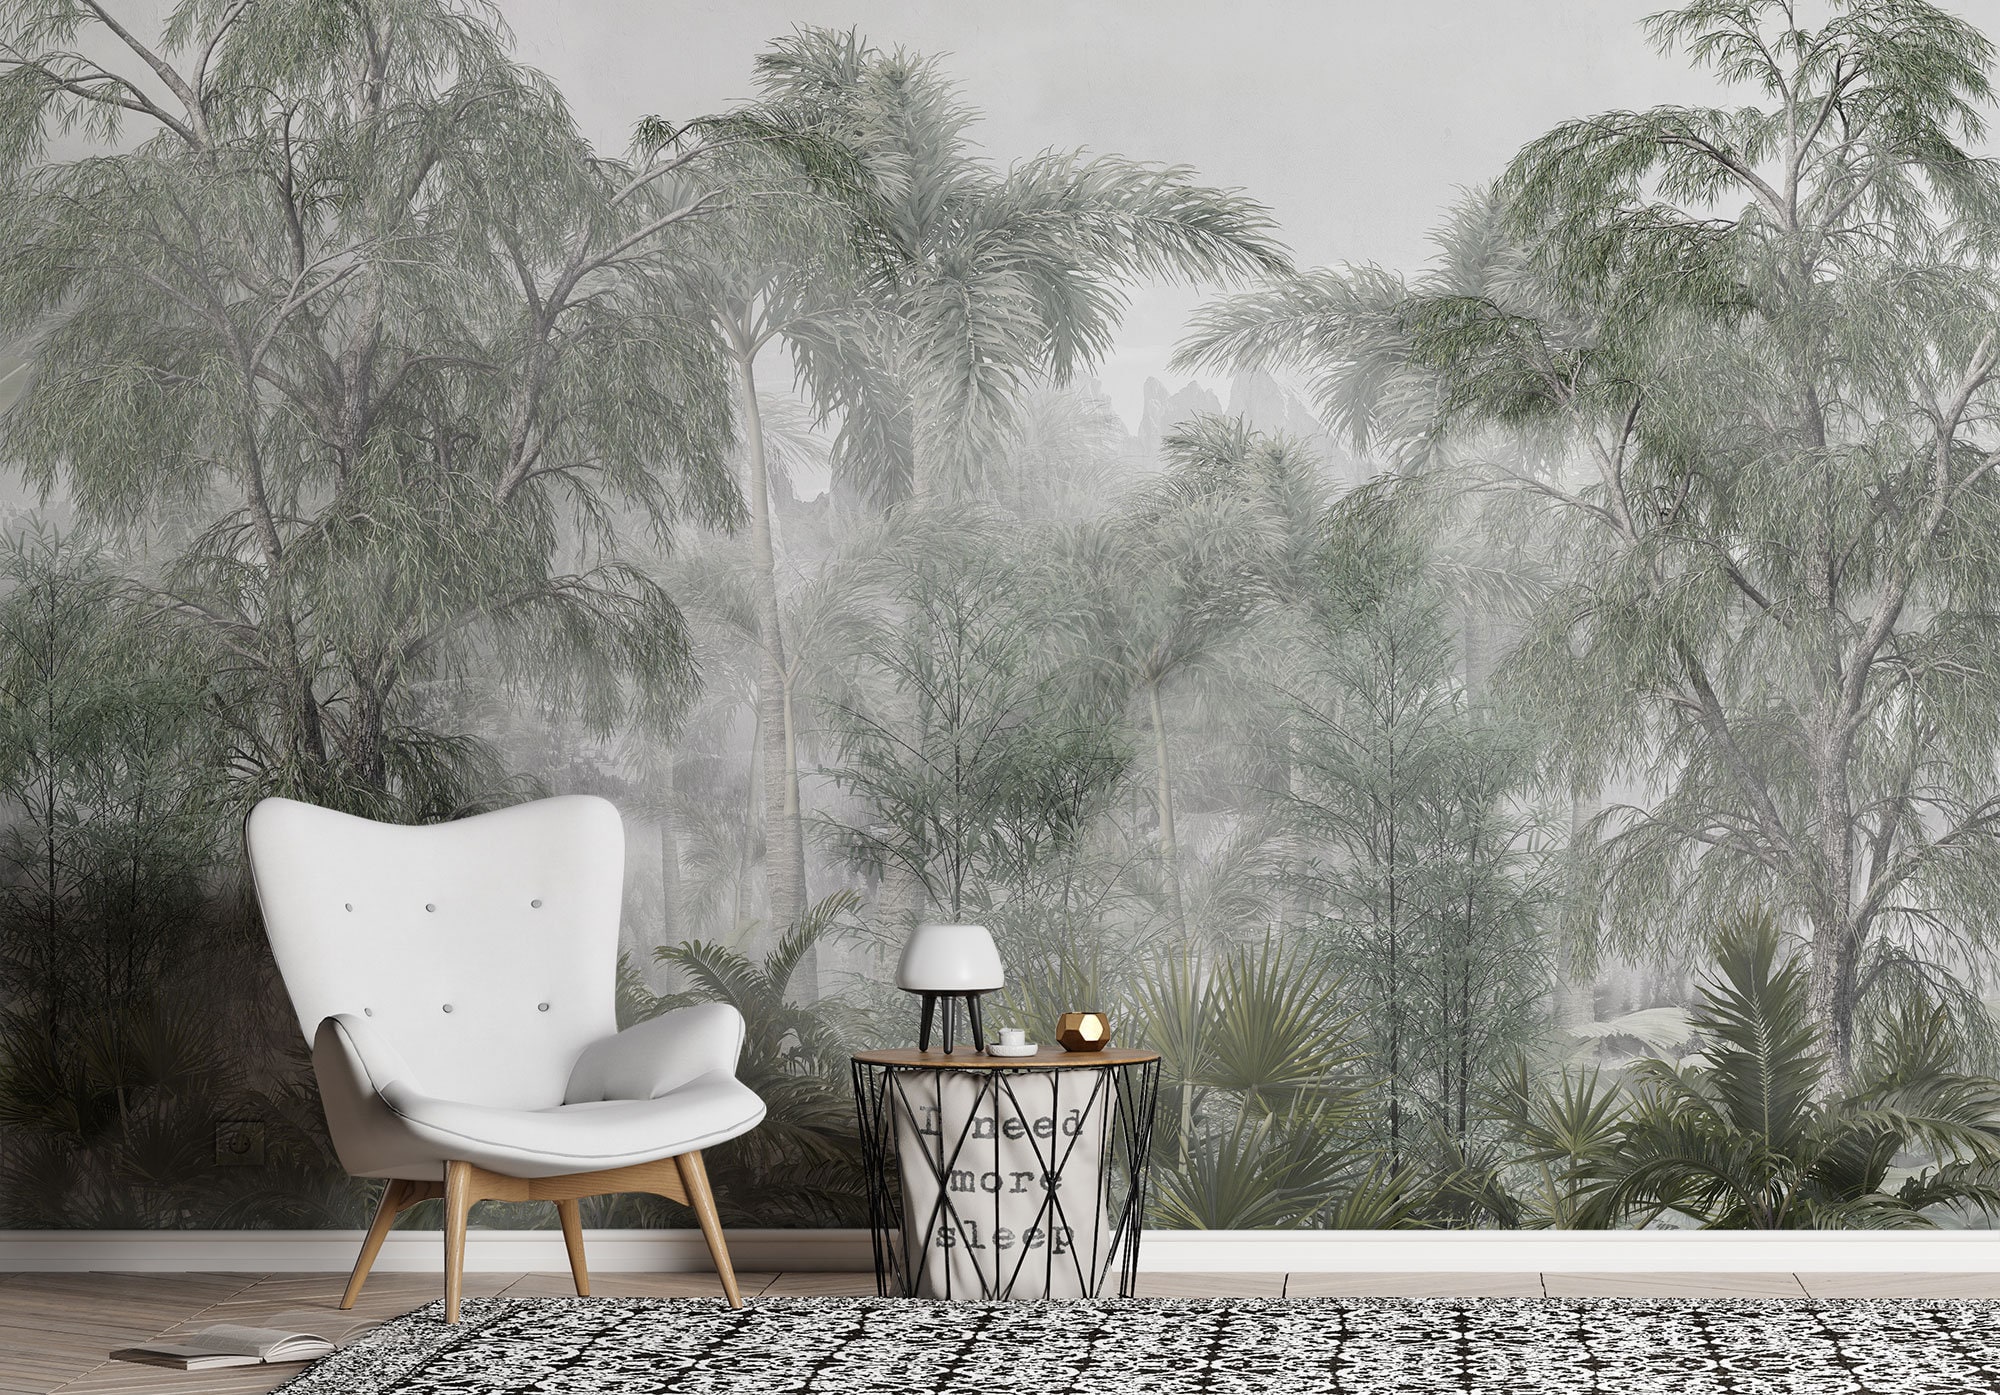 Tropical Plants in the Fog Wall Mural Vintage Jungle Scenic